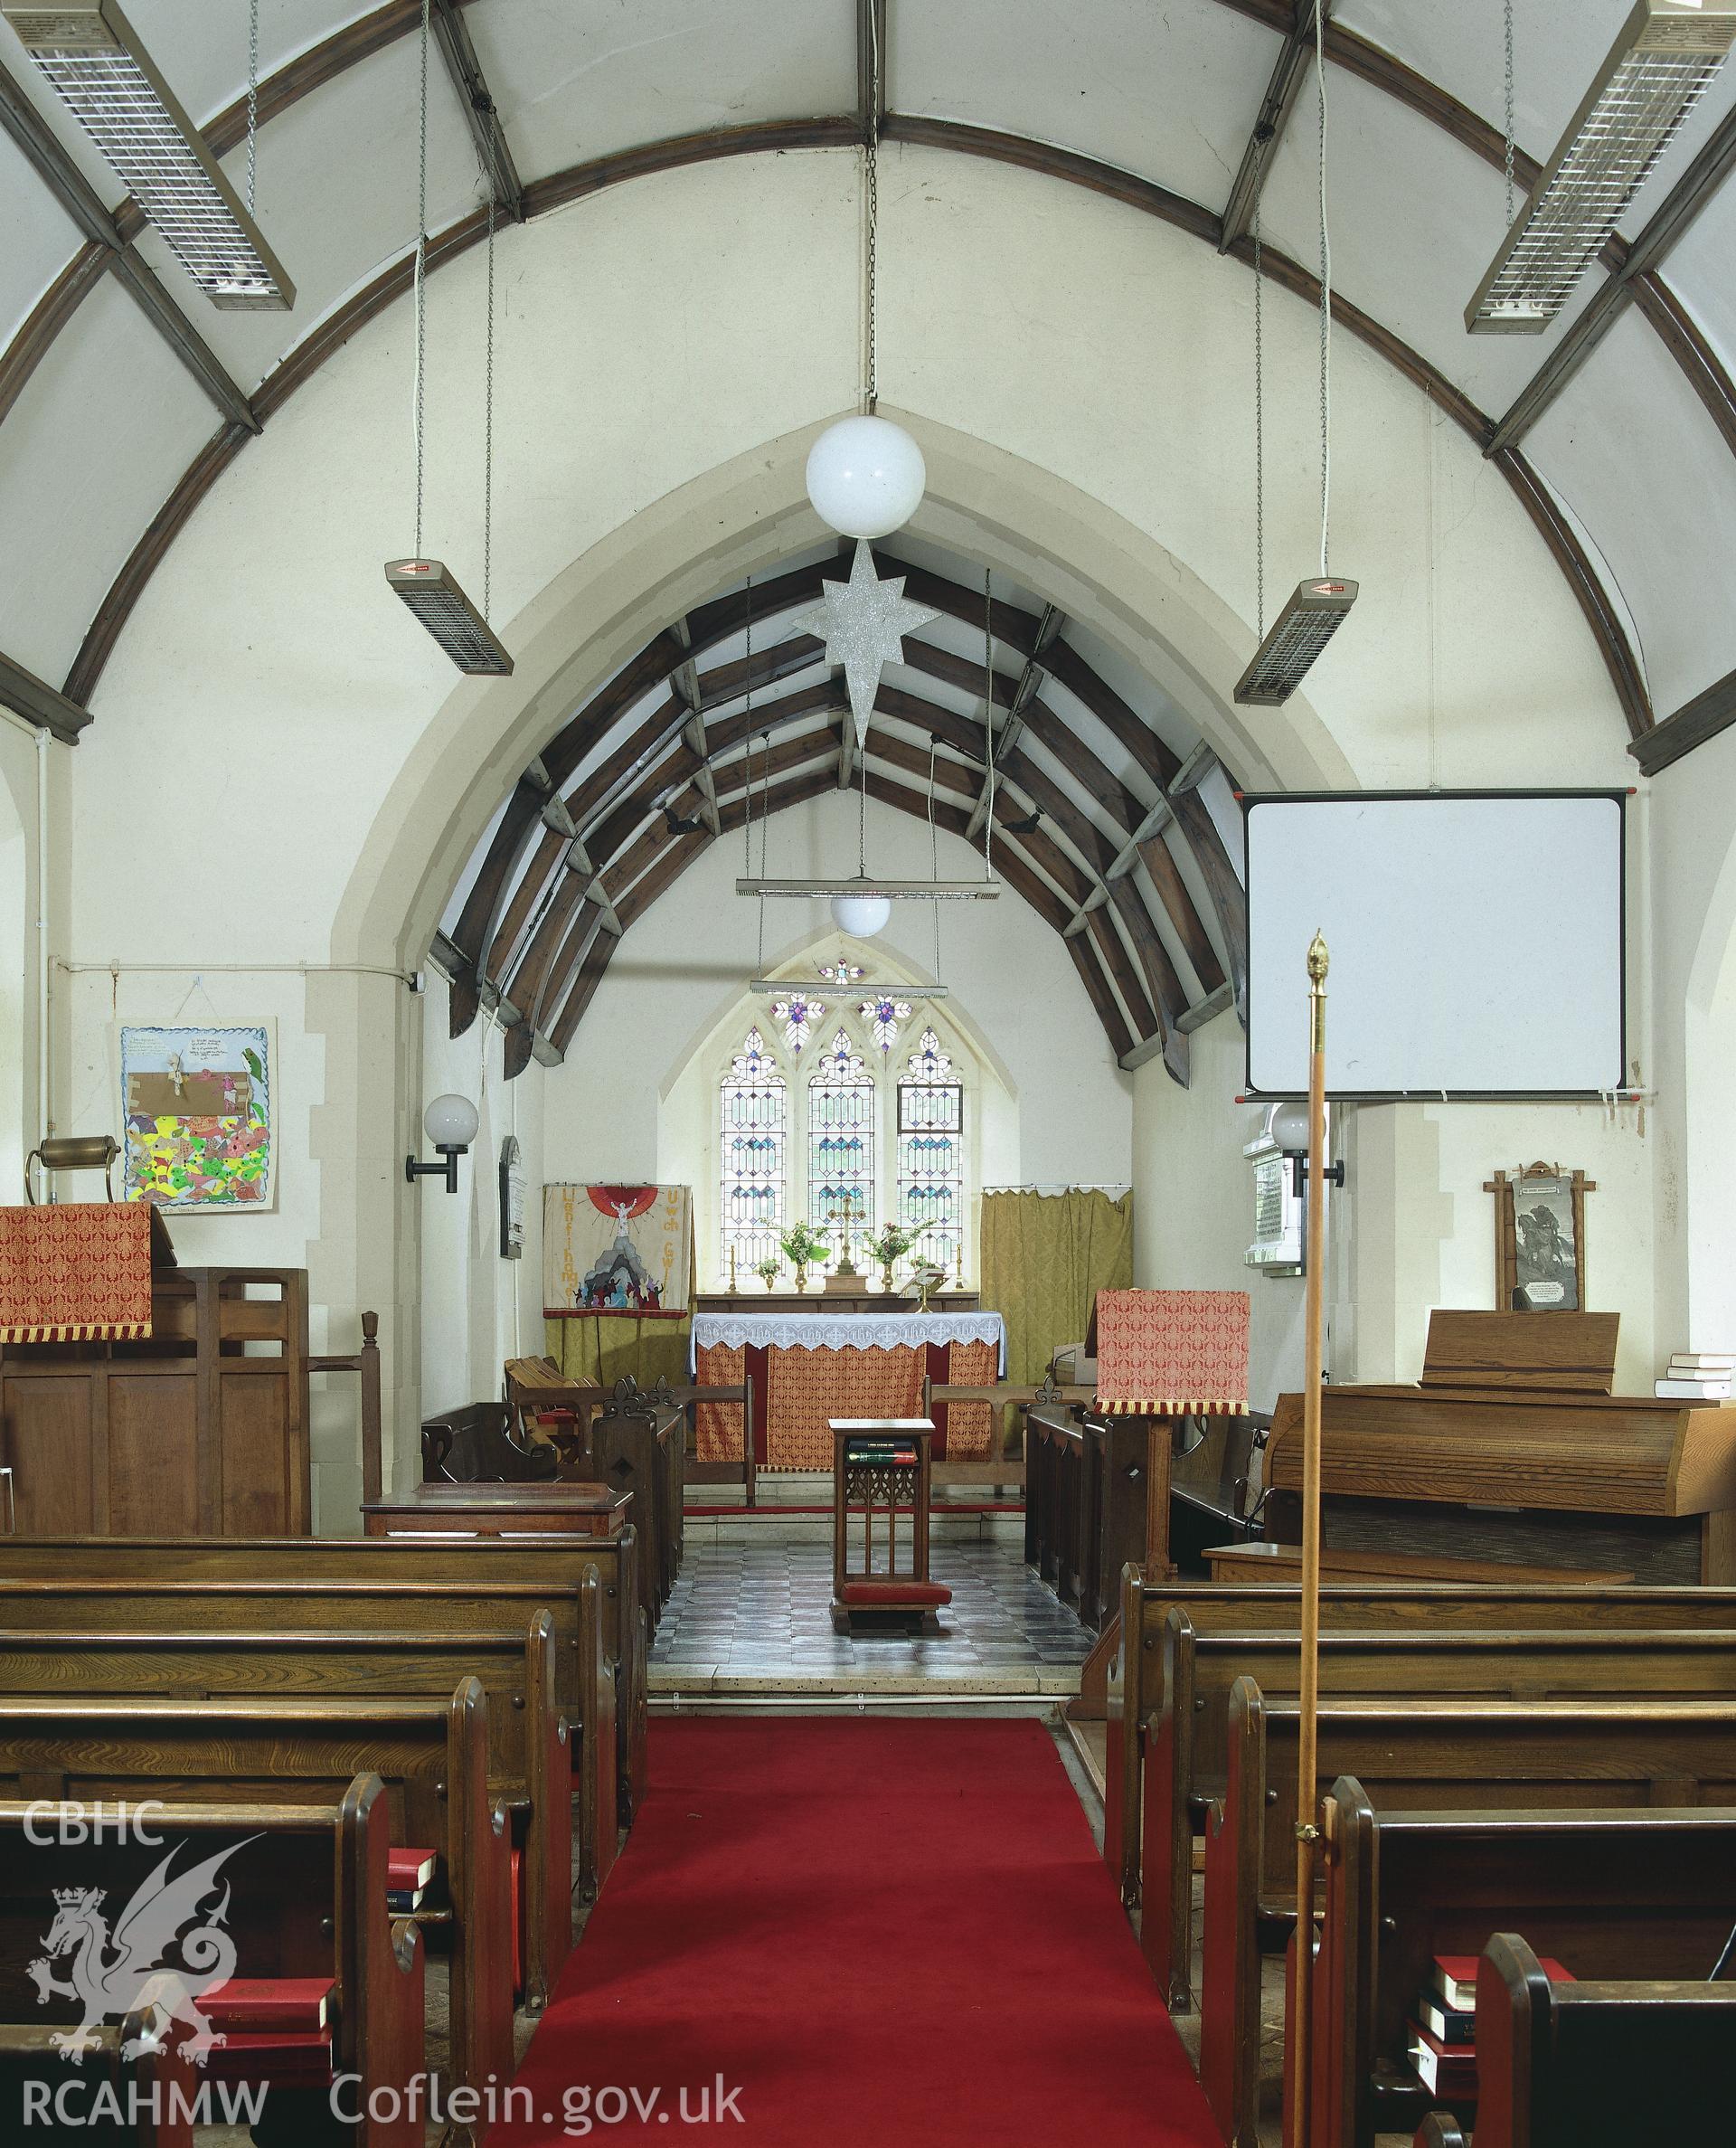 RCAHMW colour transparency showing interior view of St Michael and All Angels Church, Llanfihangel uwch Gwili.